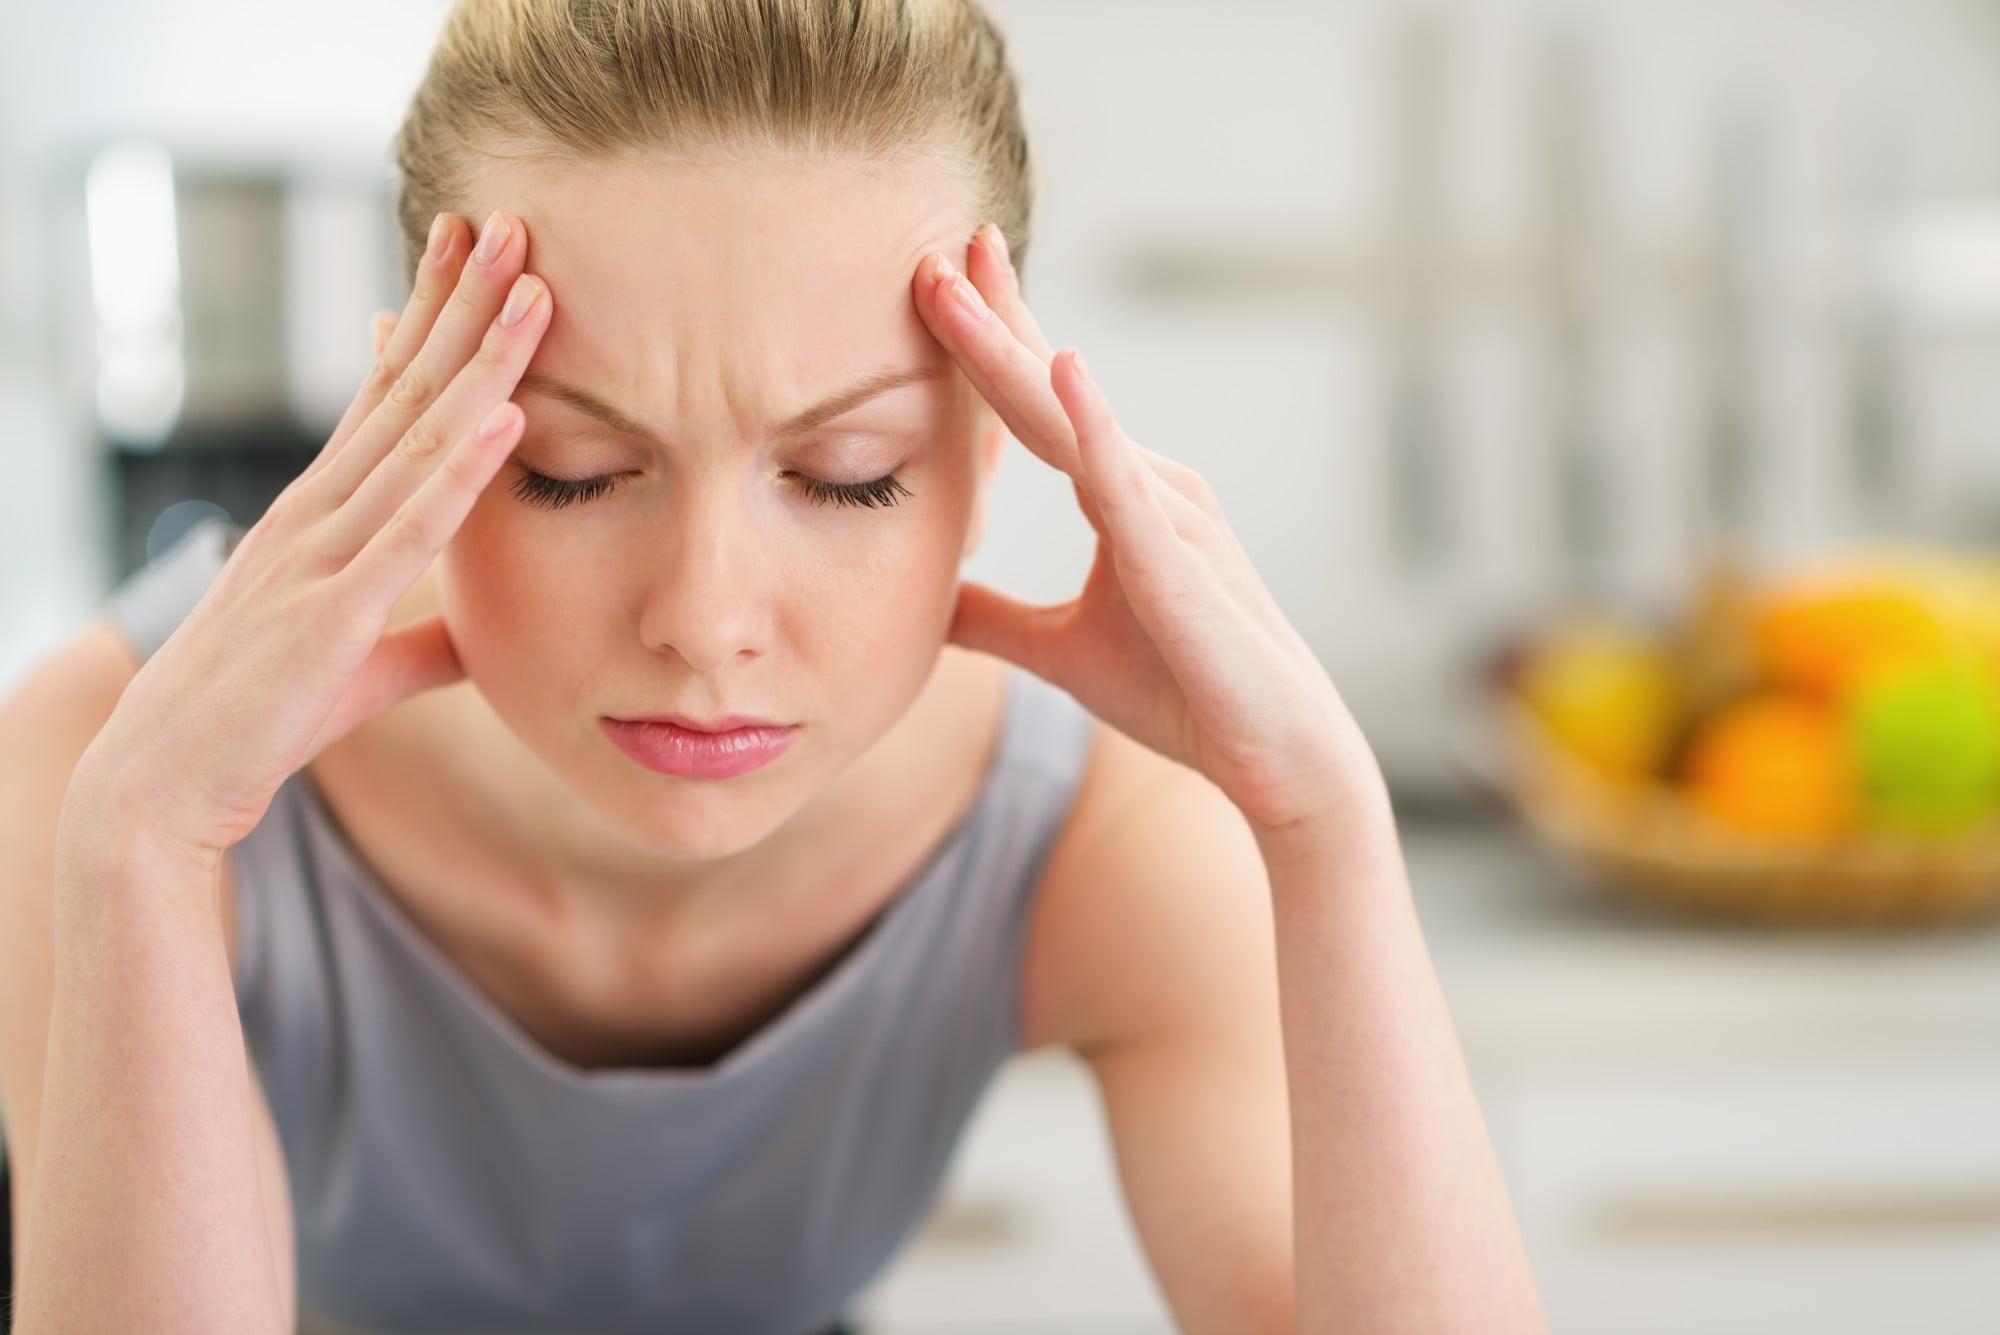 A chronic migraine can cause severe throbbing pain and other characteristic symptoms. Find out what triggers these painful headaches and put a stop to it now!